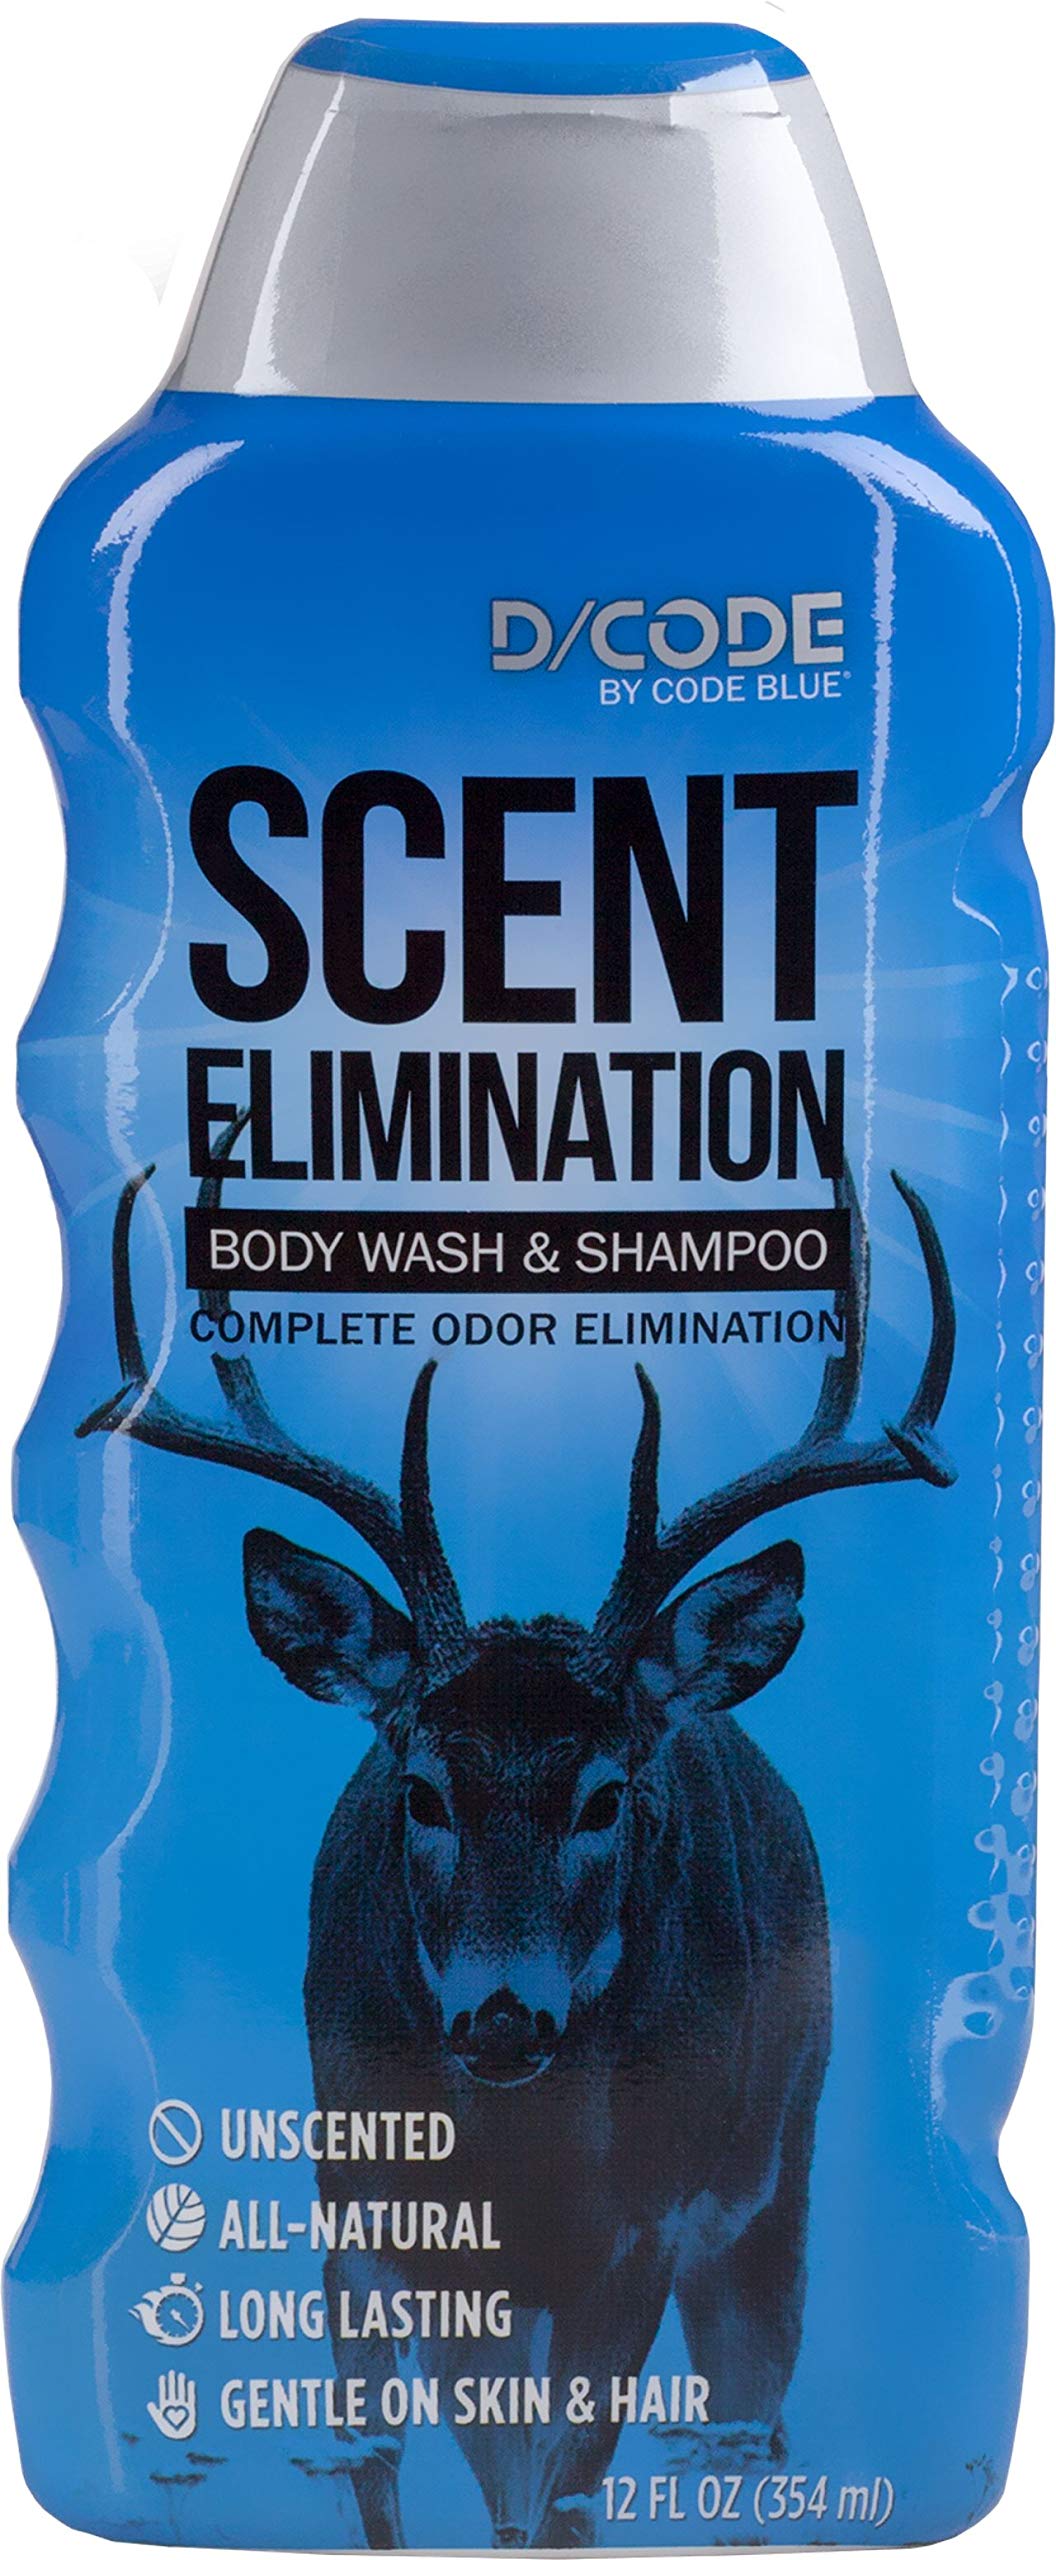 Book Cover Code Blue D/CODE by Code Blue Scent Elimination Body Wash & Shampoo, 12 fl oz